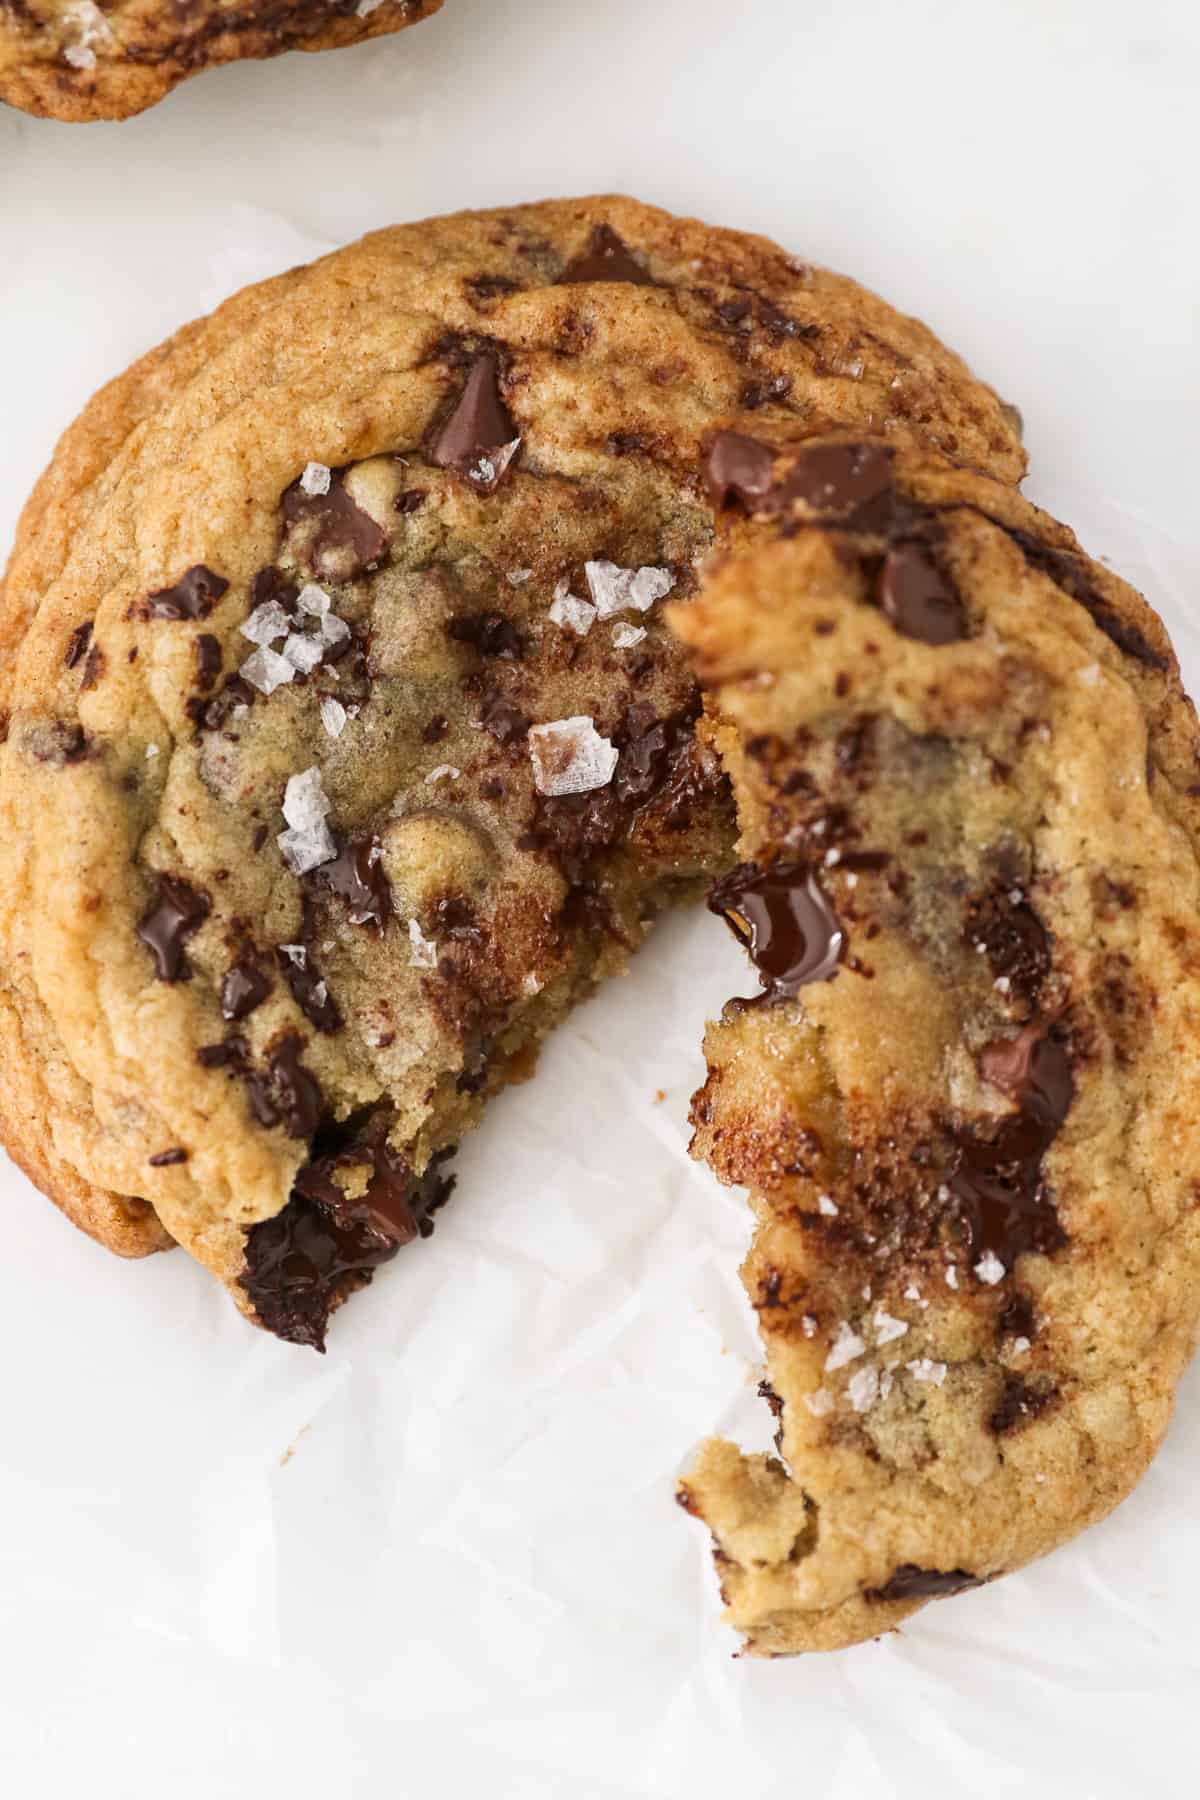 Overhead close up view of a giant chocolate chip cookie broken in half.